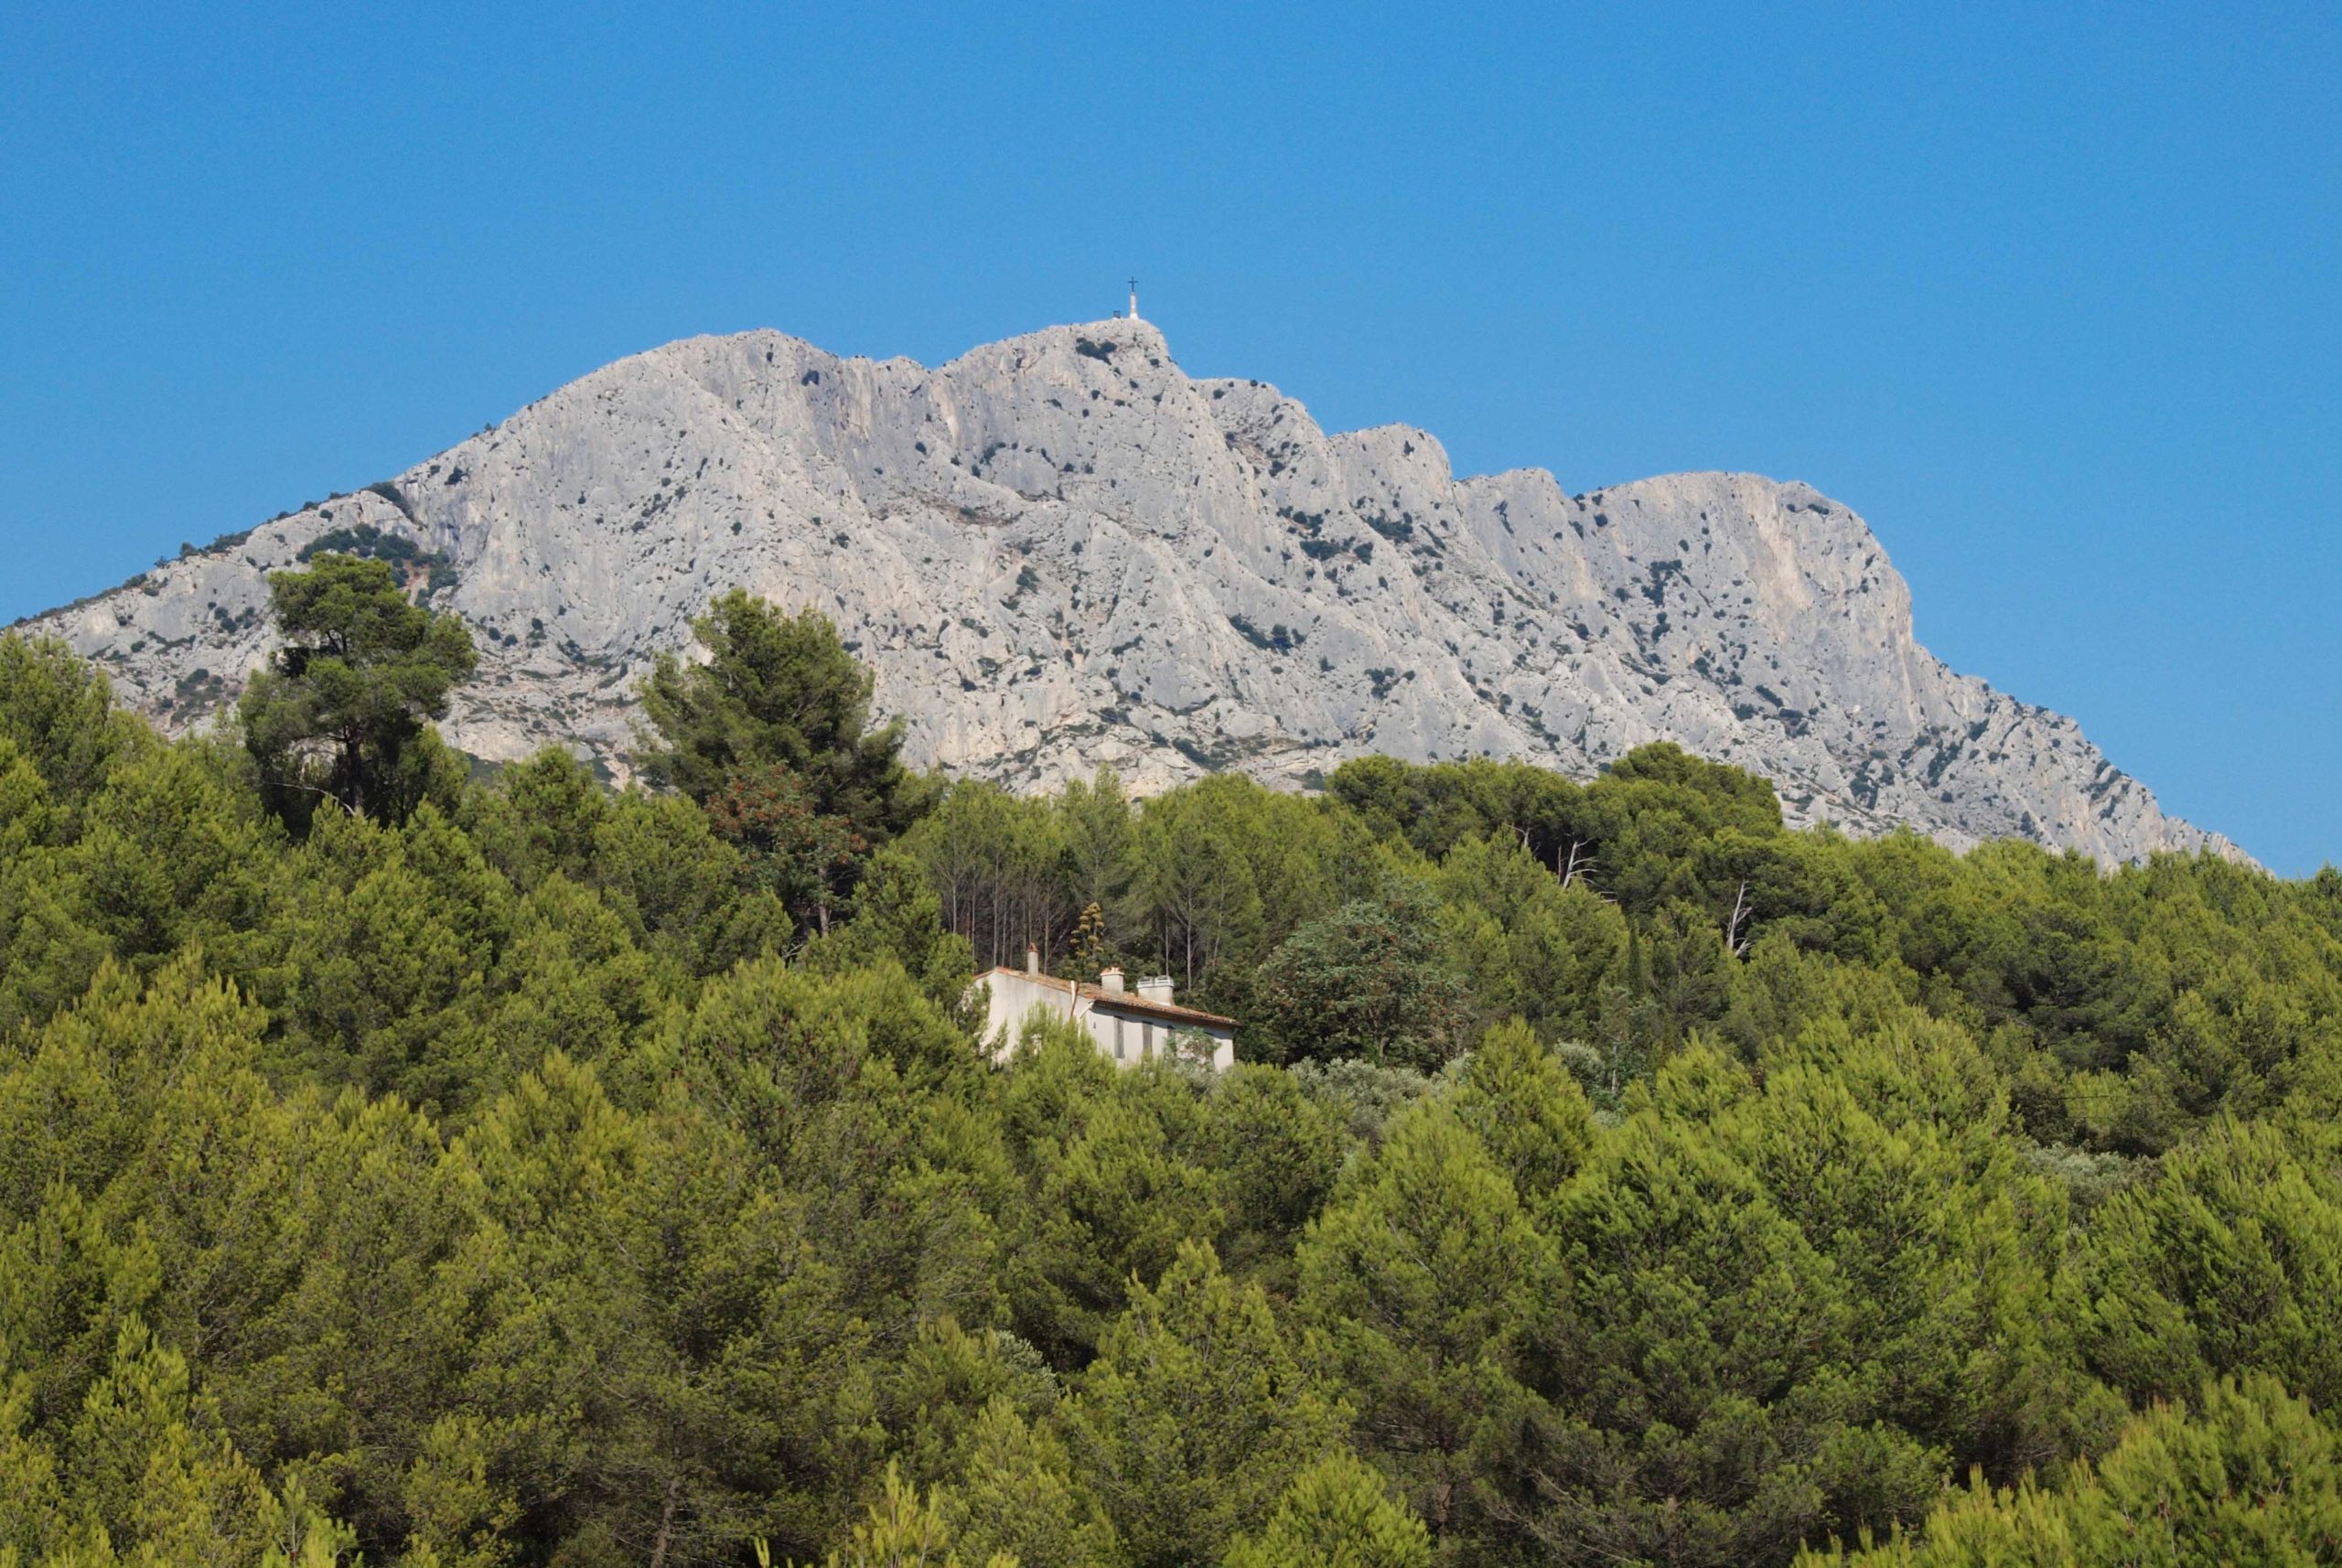 Montagne Sainte-Victoire from Beaurecueil © François GOGLINS - licence [CC BY-SA 4.0] from Wikimedia Commons